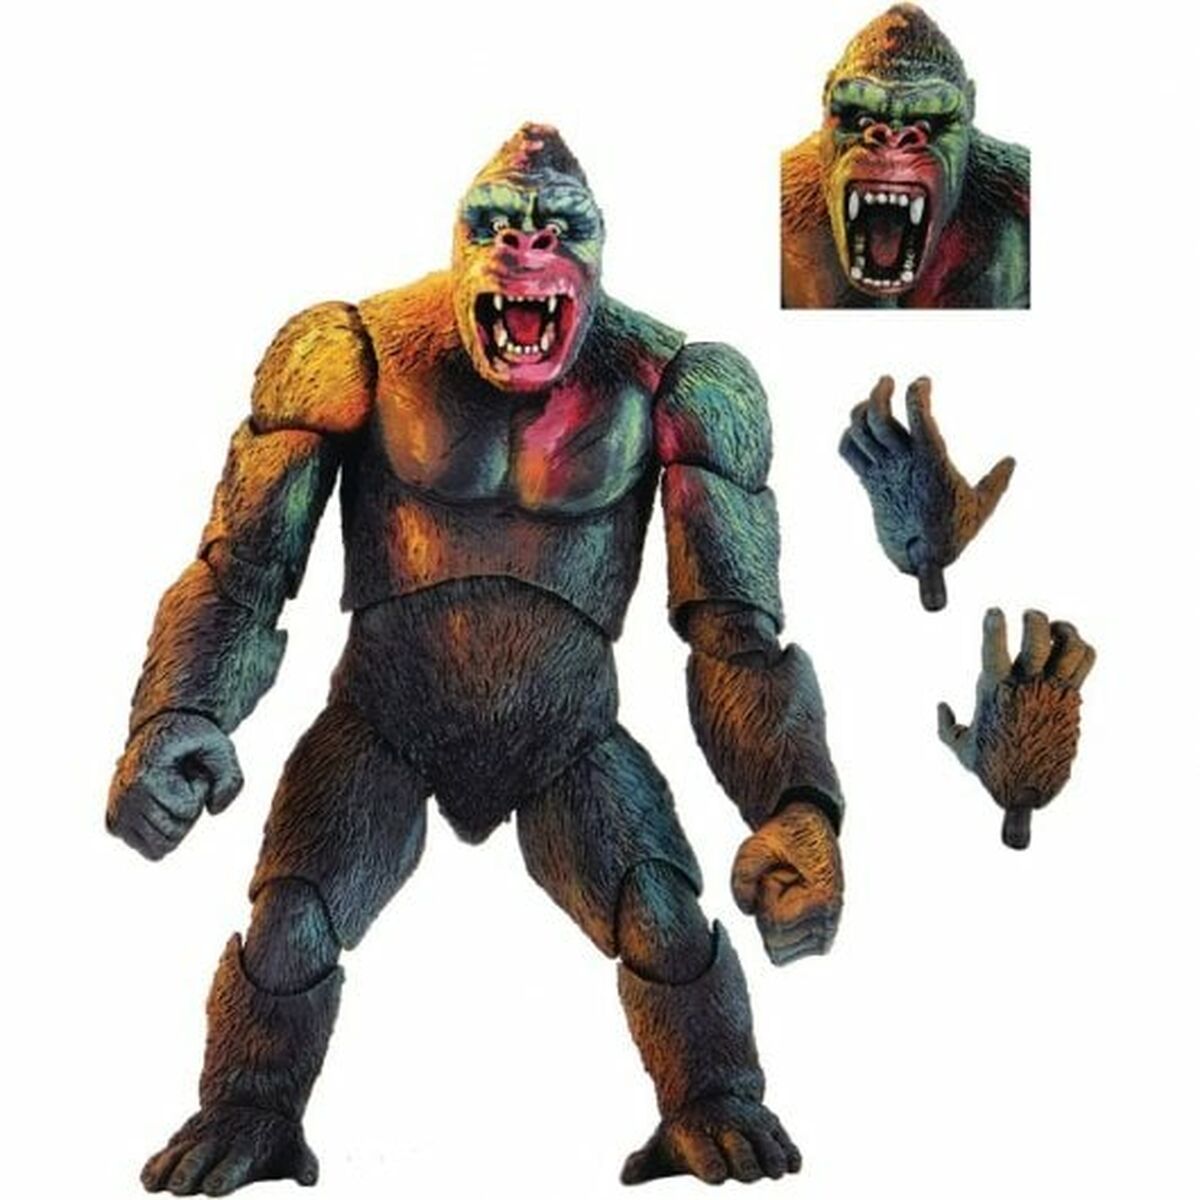 NECA Actionfigur Ultimate King Kong 20cm